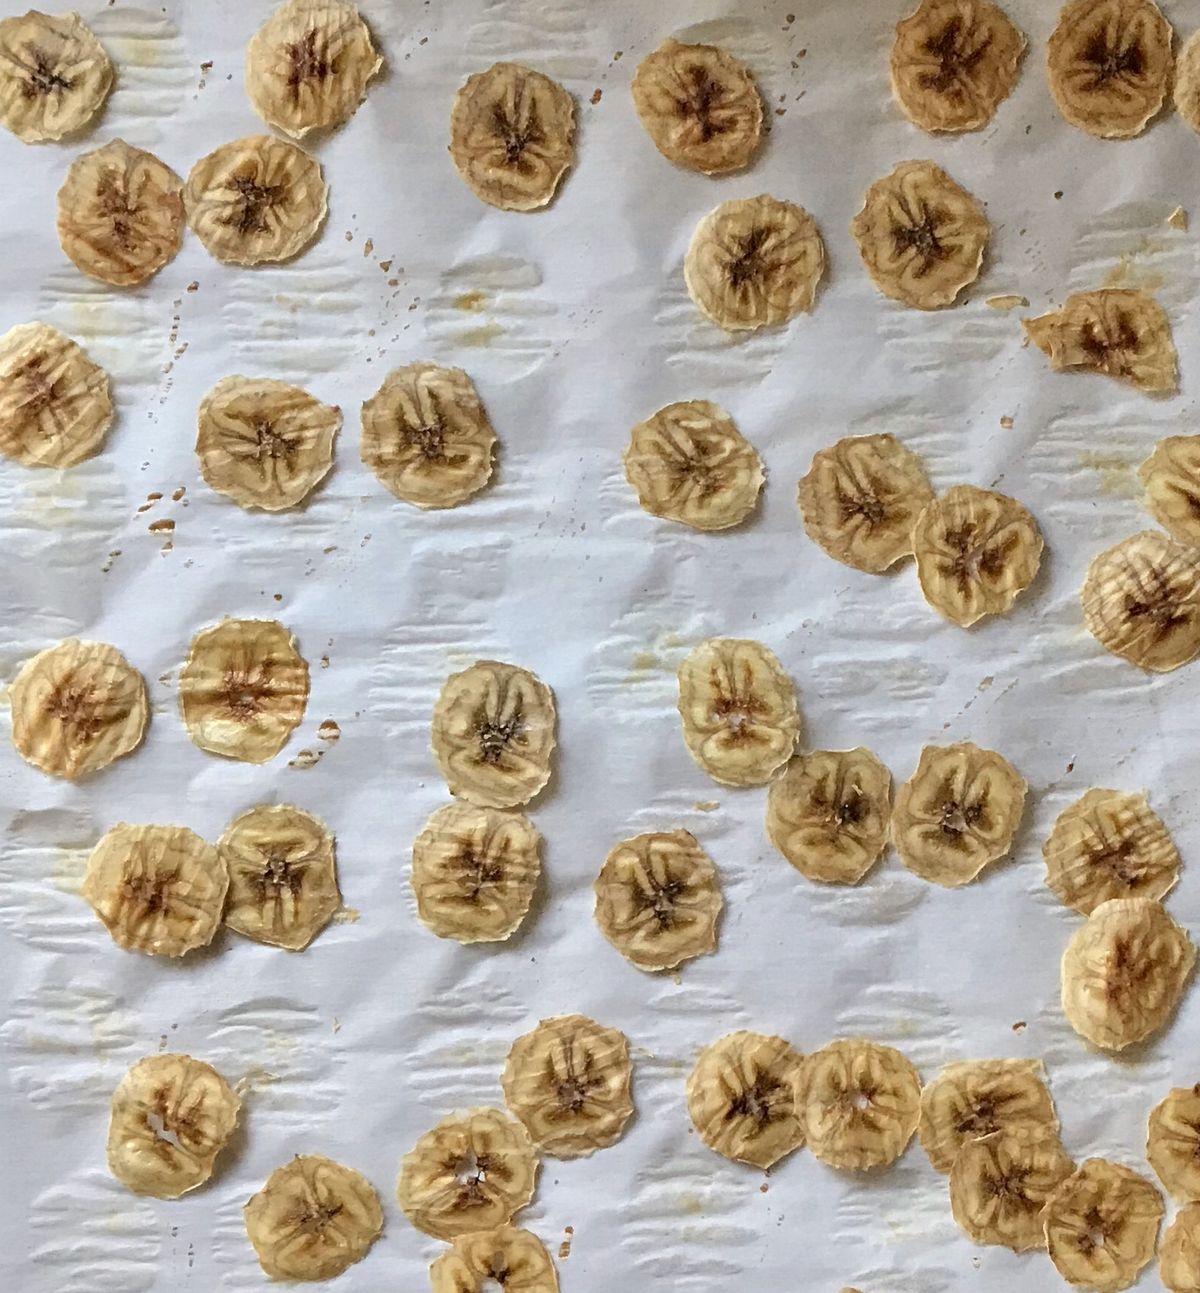 Freshly made banana chips on parchment paper.